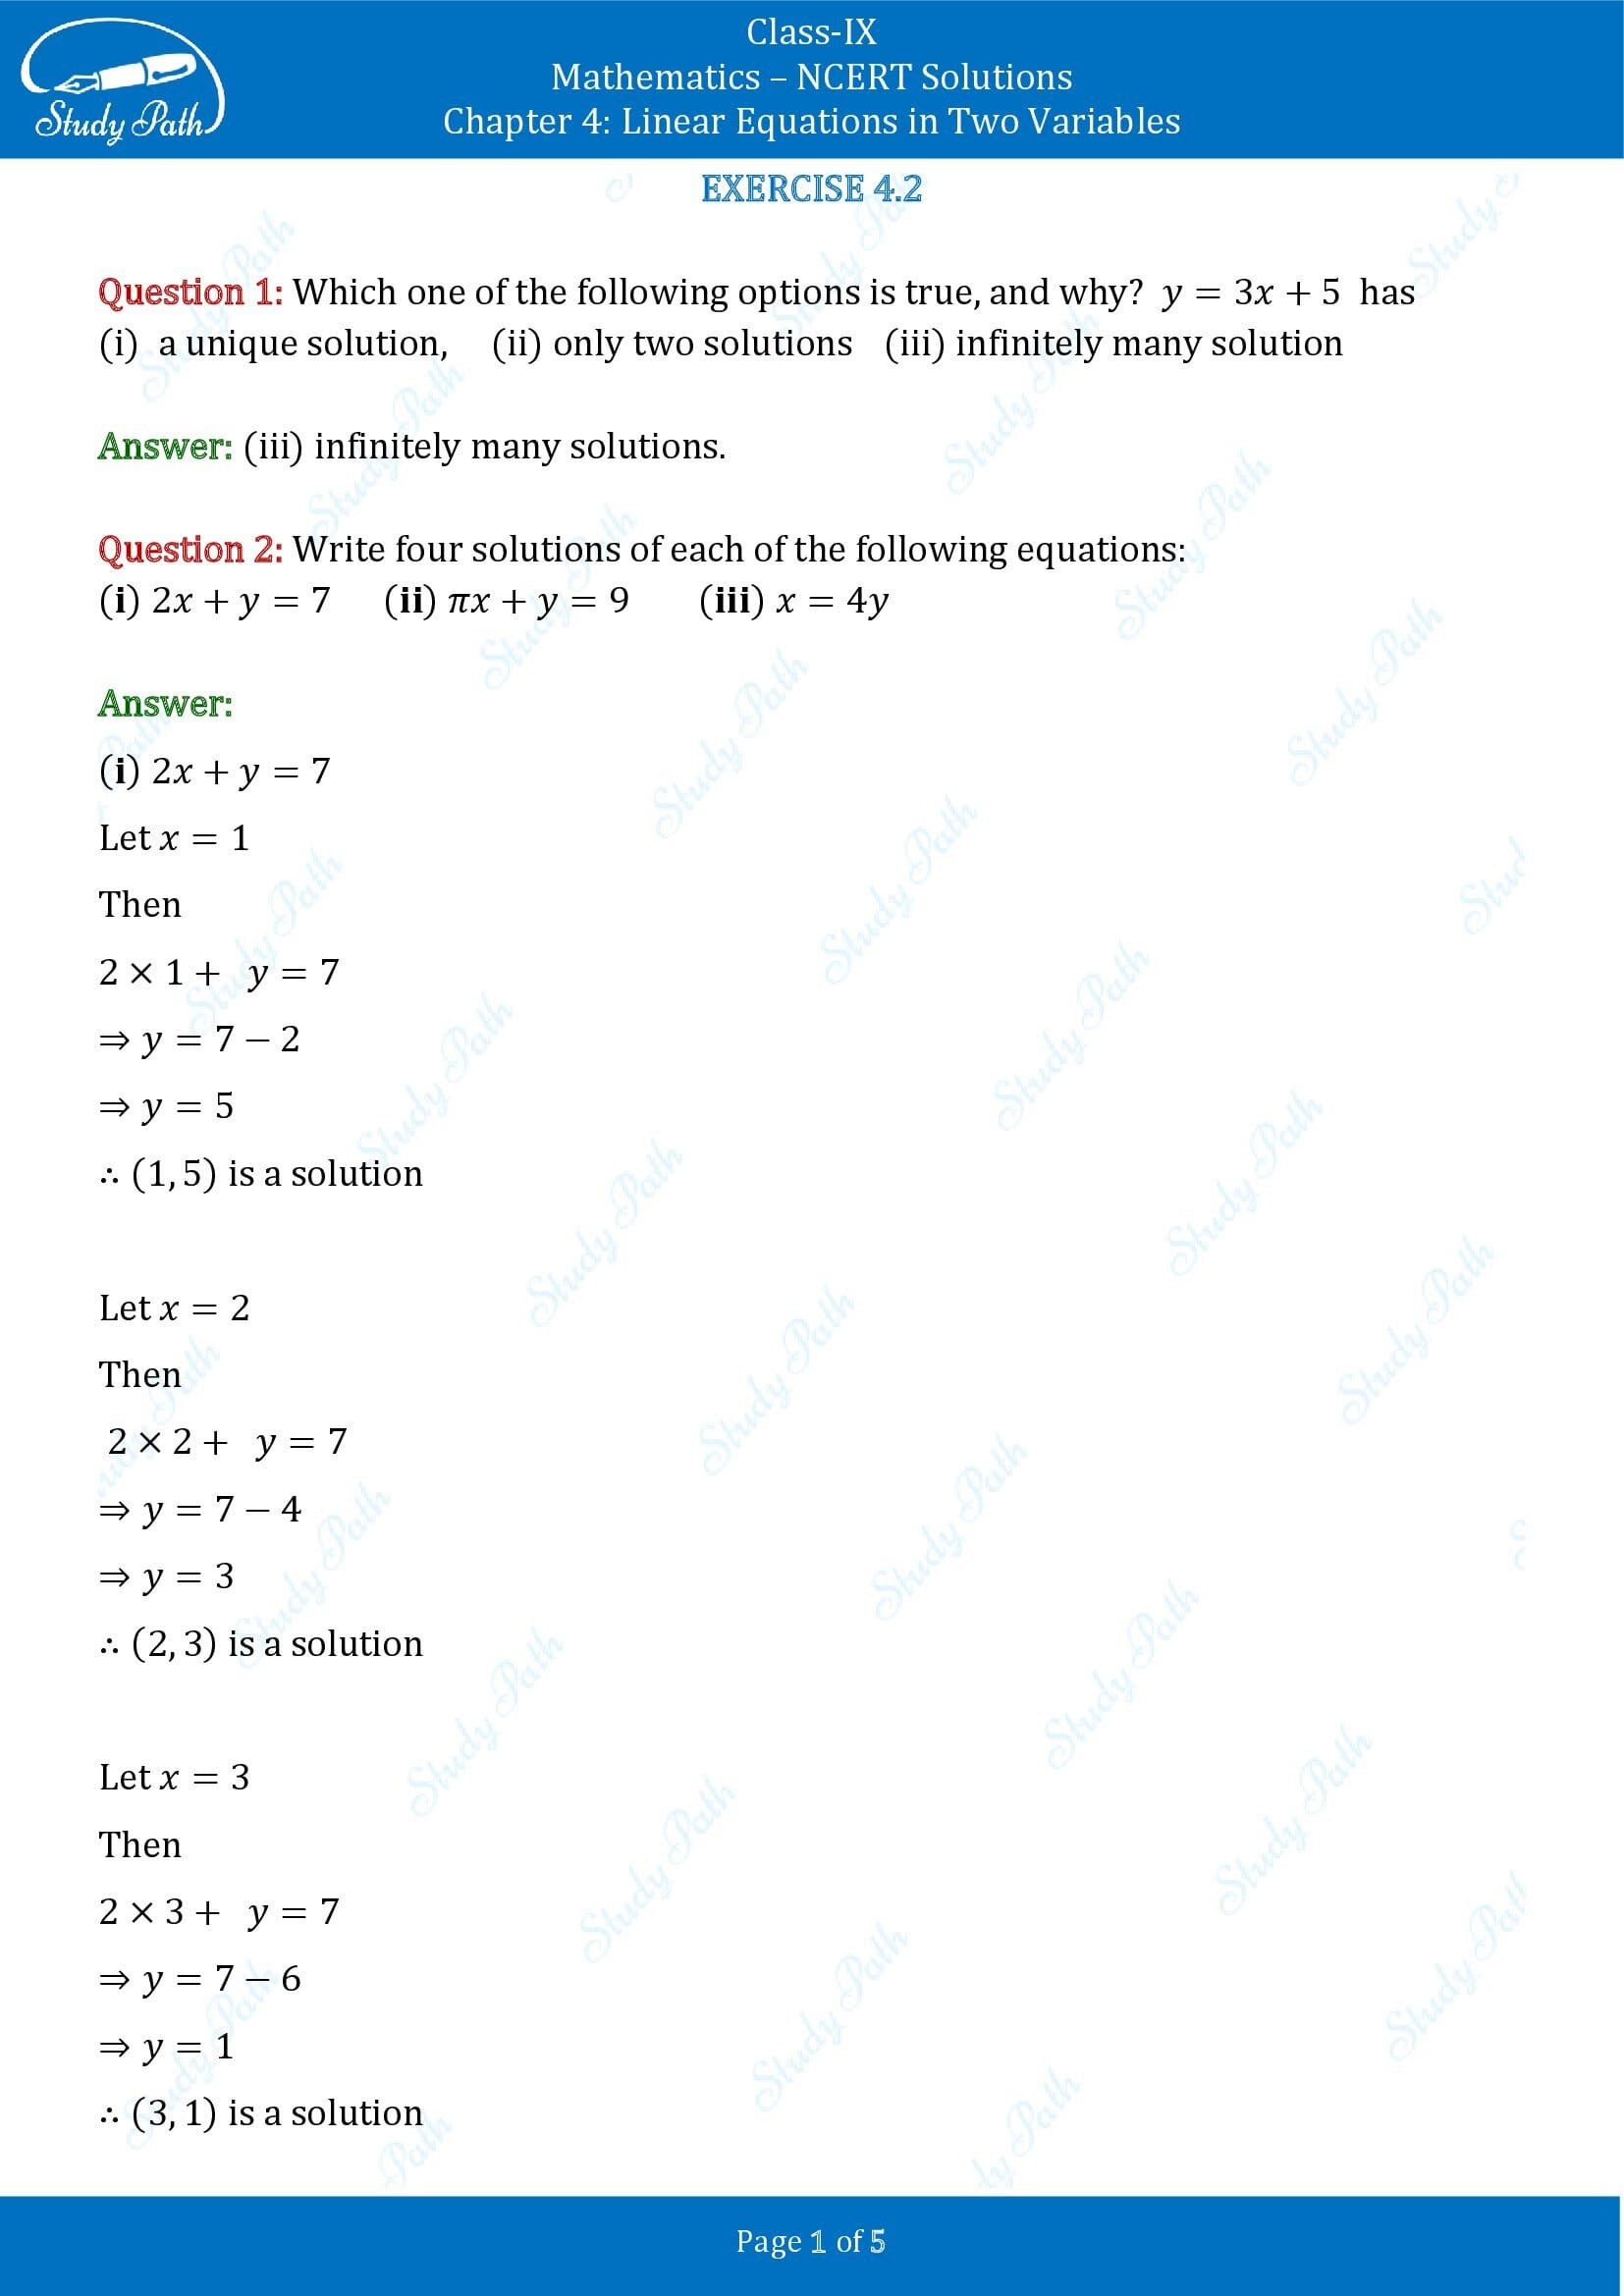 NCERT Solutions for Class 9 Maths Chapter 4 Linear Equations in Two Variables Exercise 4.2 00001